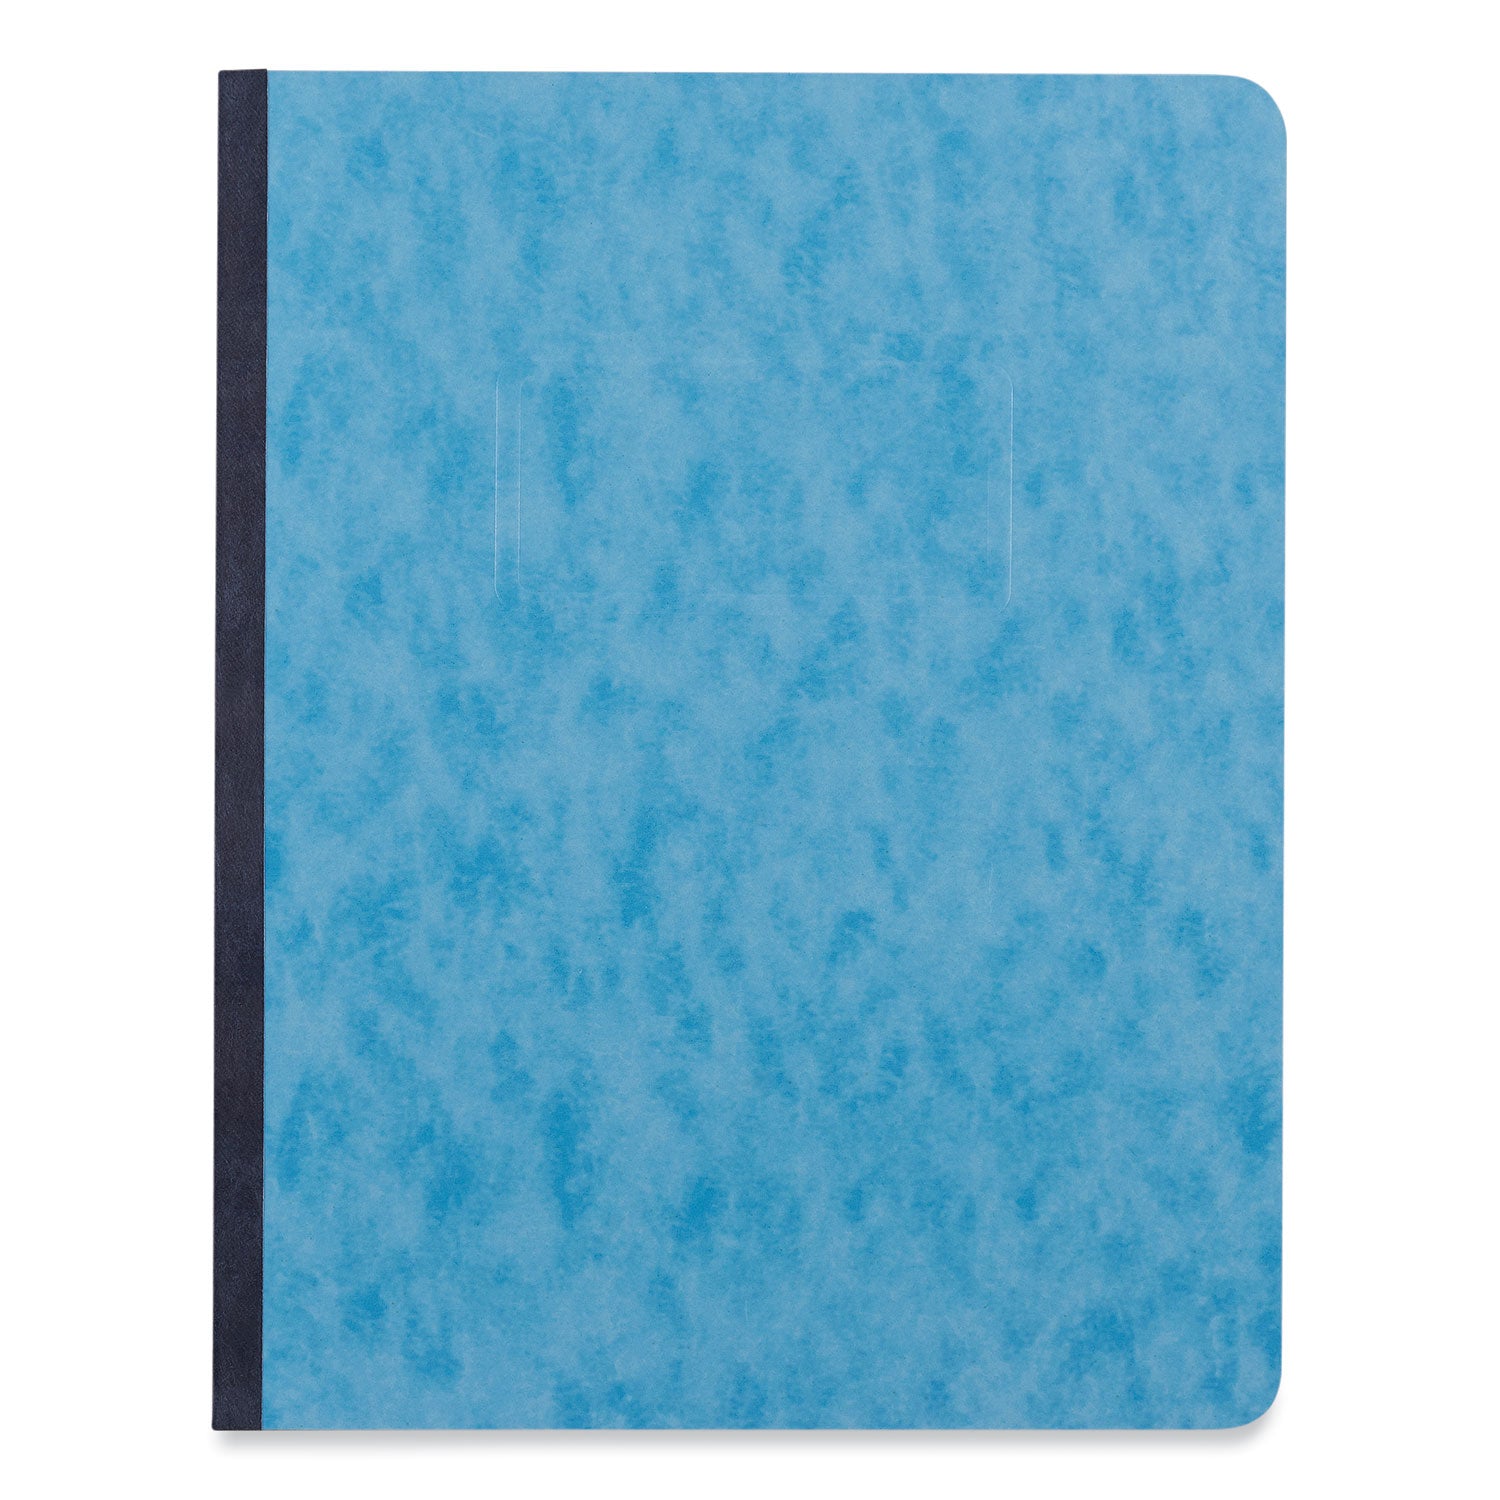 Pressboard Report Cover, Two-Piece Prong Fastener, 3" Capacity, 8.5 x 11, Light Blue/Light Blue - 